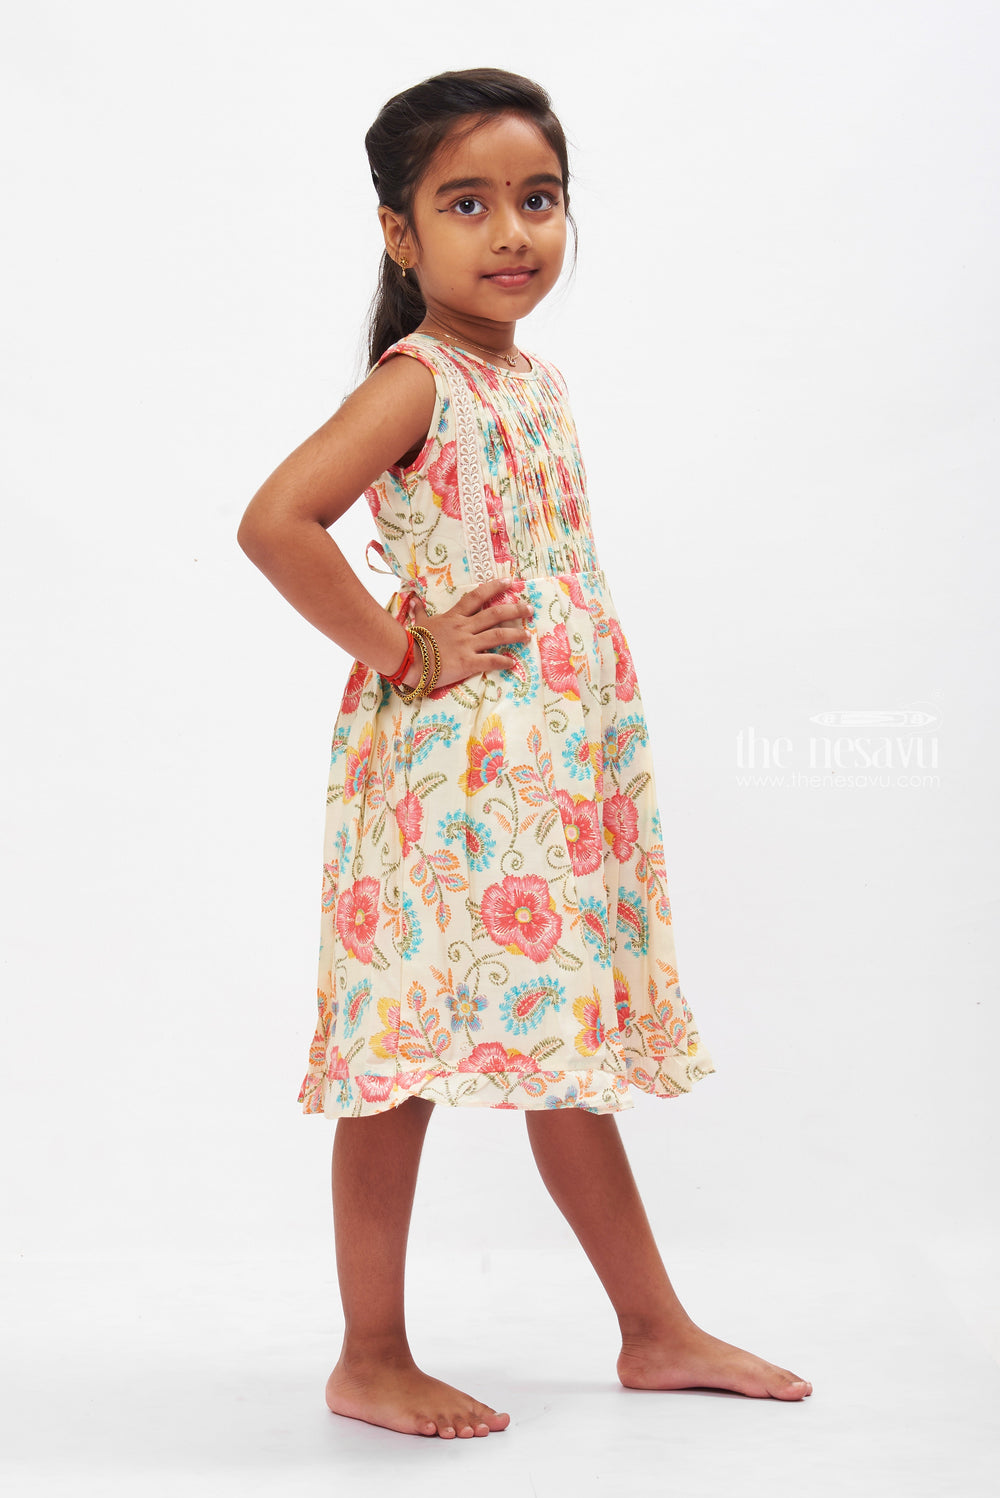 The Nesavu Girls Cotton Frock Sunny Floral Kids Cotton Frock with Elegant Lace Detailing Nesavu Girls Summer Cotton Dress Favorites | Lace Detailed Floral Cotton Frock | The Nesavu